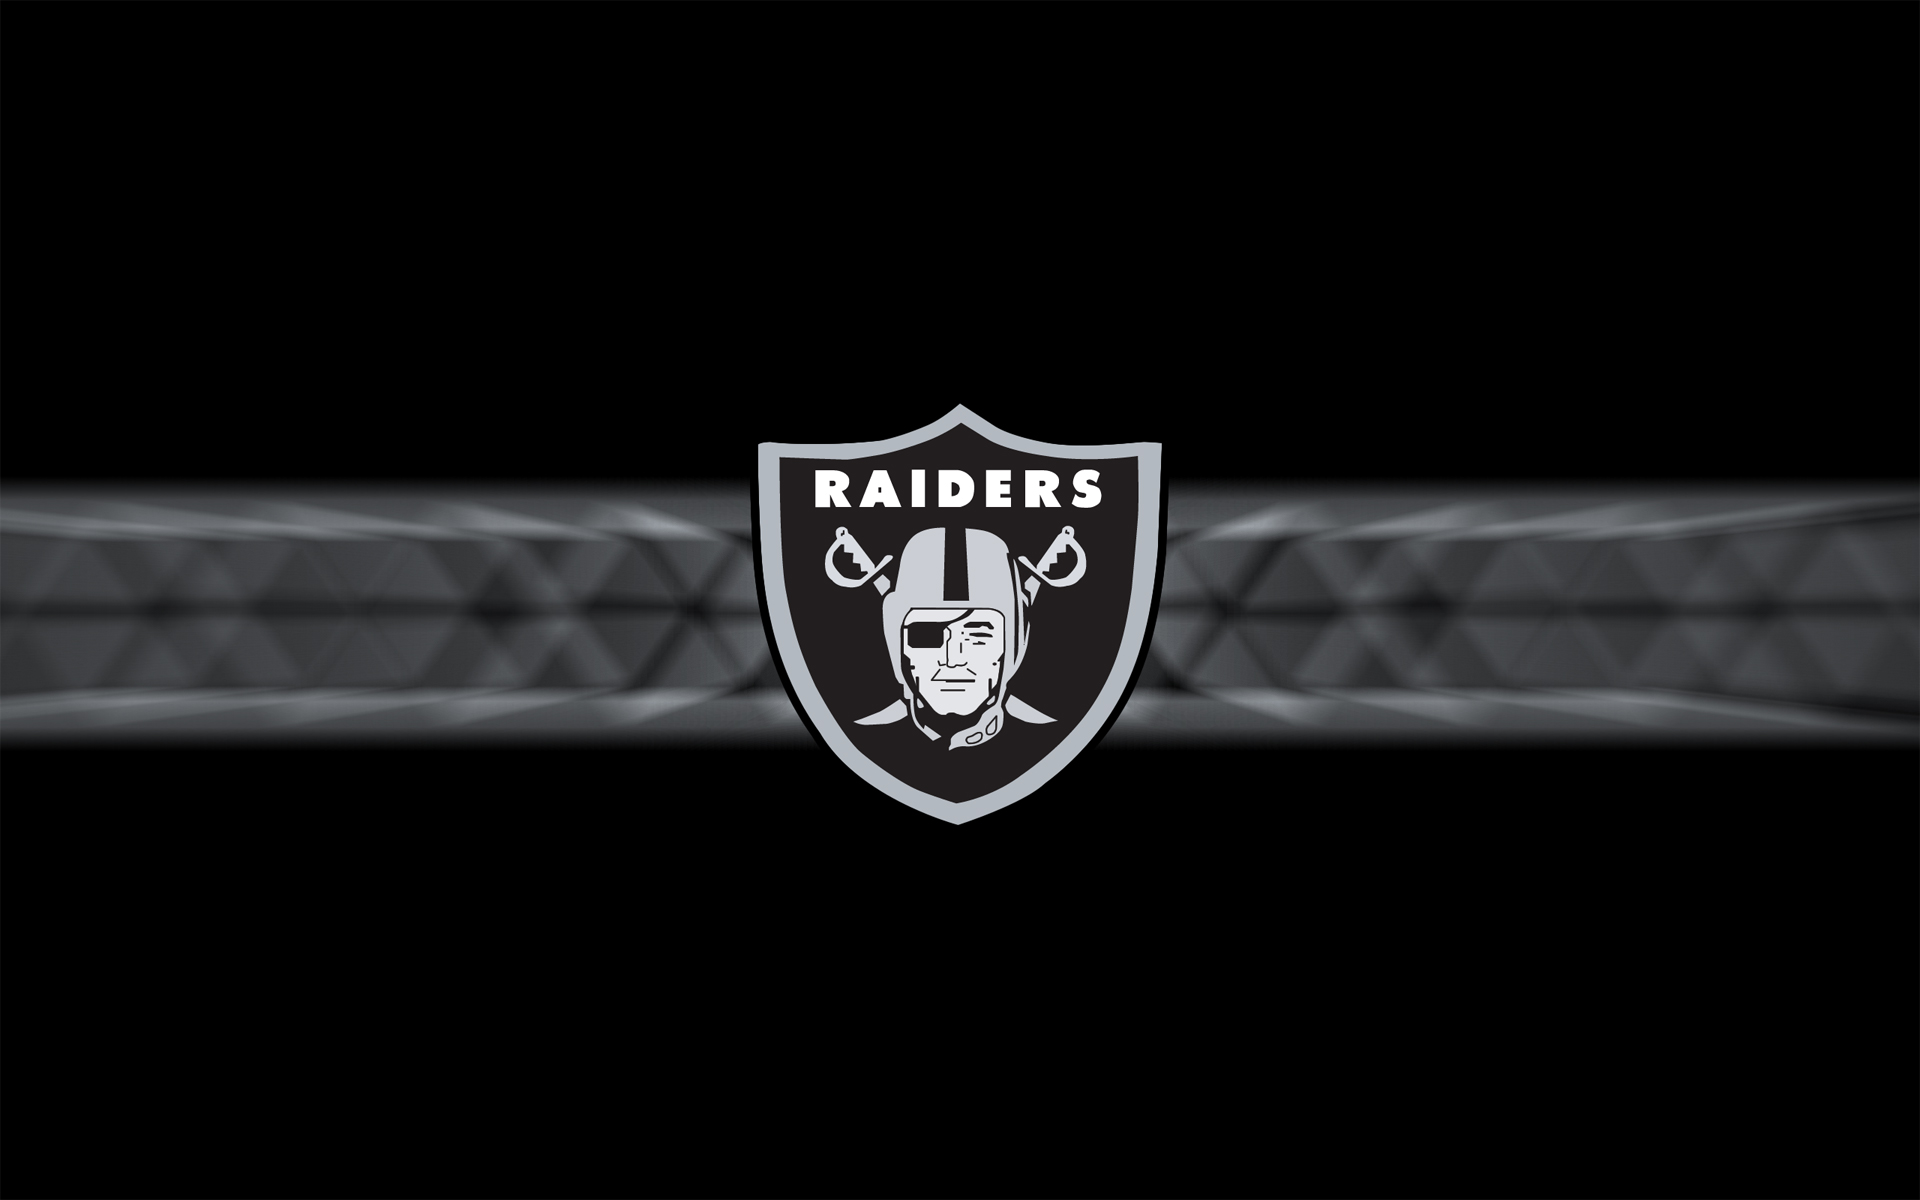 City Chiefs Oakland Raiders Or San Diego Chargers